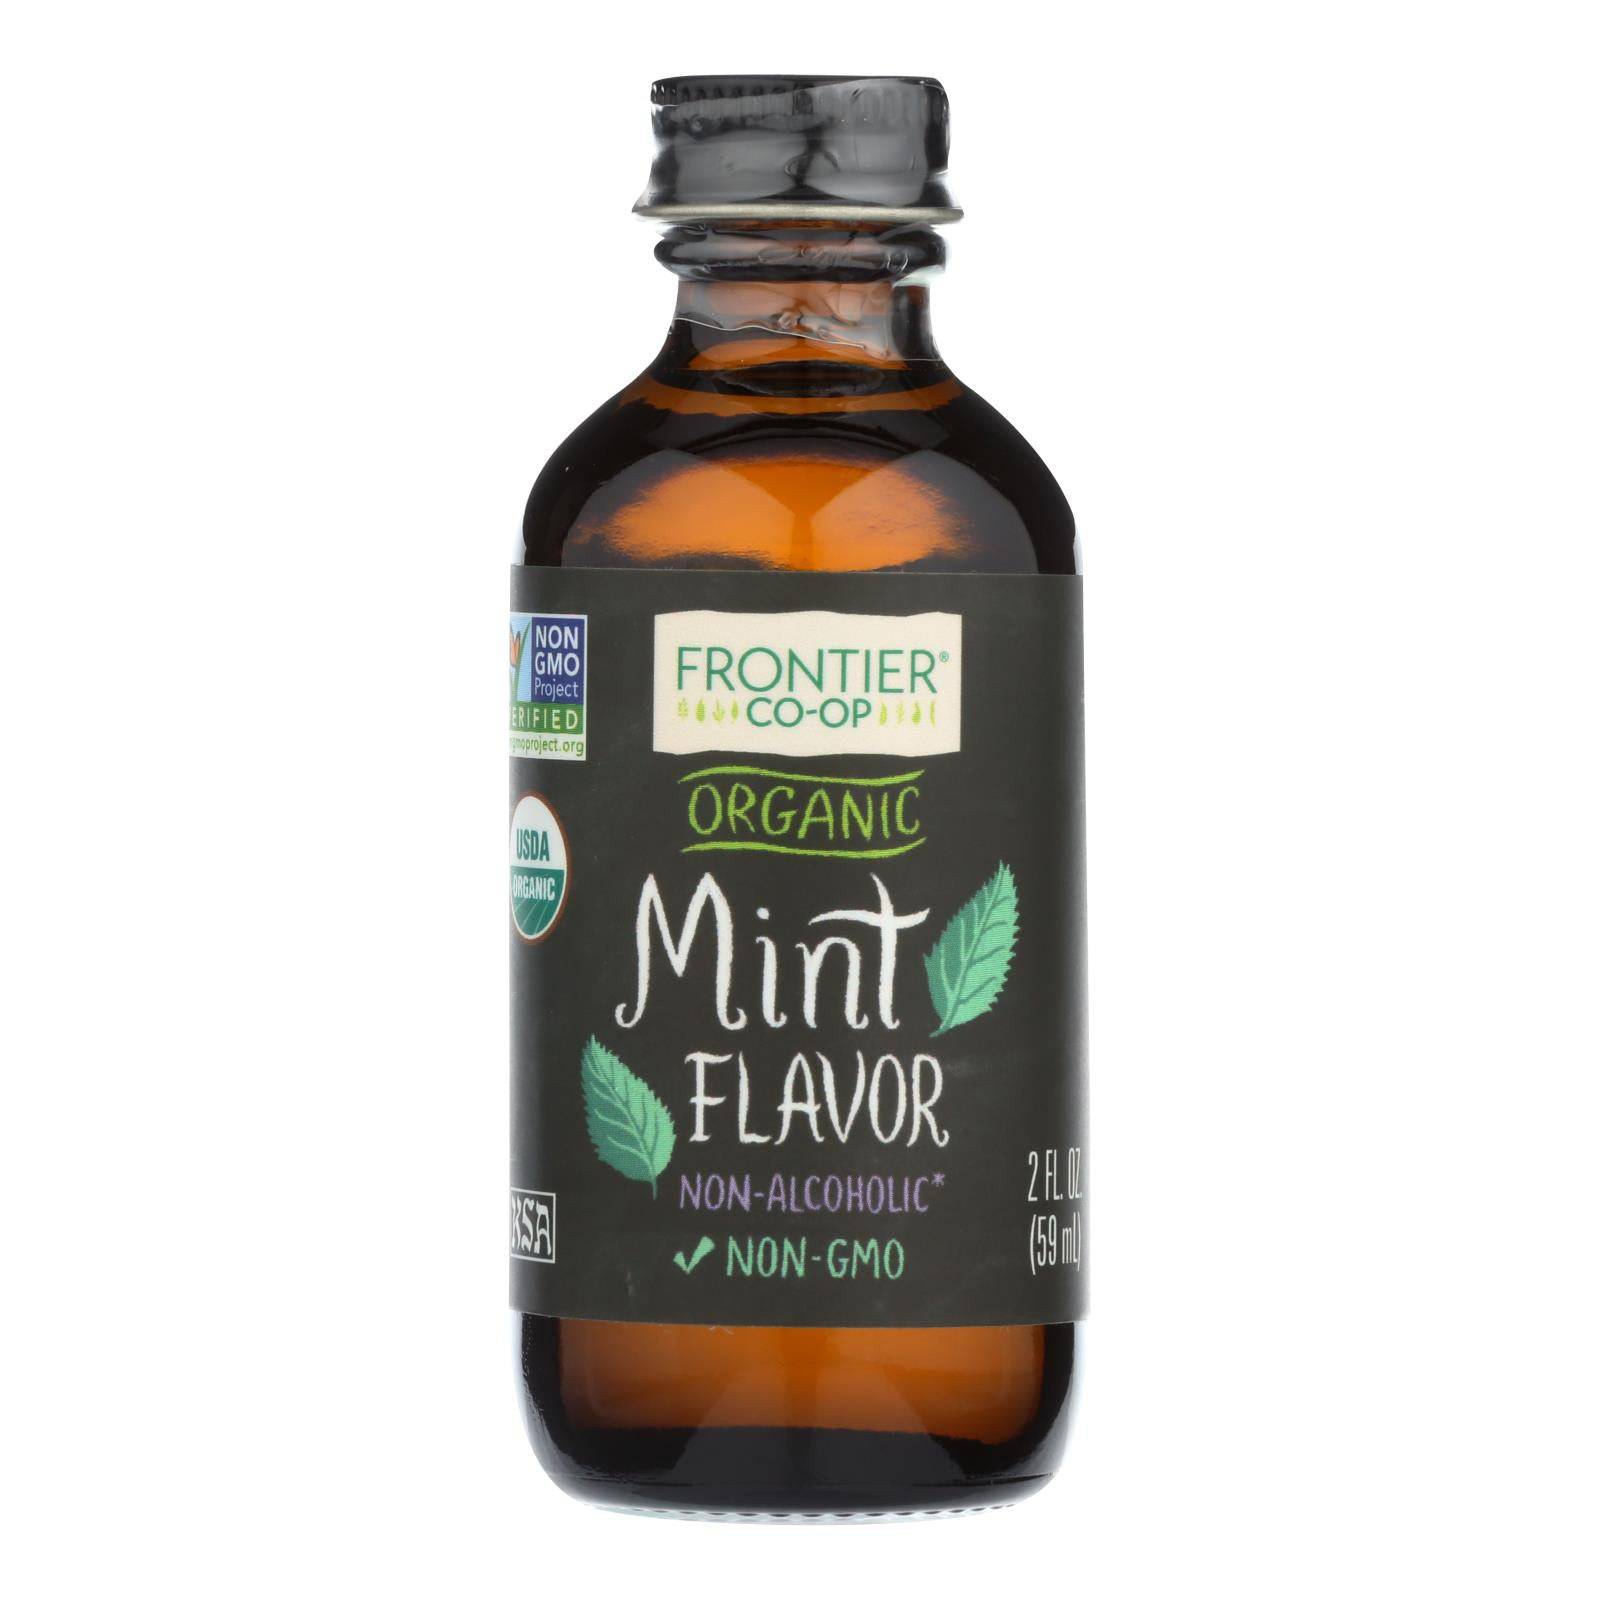 Buy Frontier Herb Mint Flavor - Organic - 2 Oz  at OnlyNaturals.us